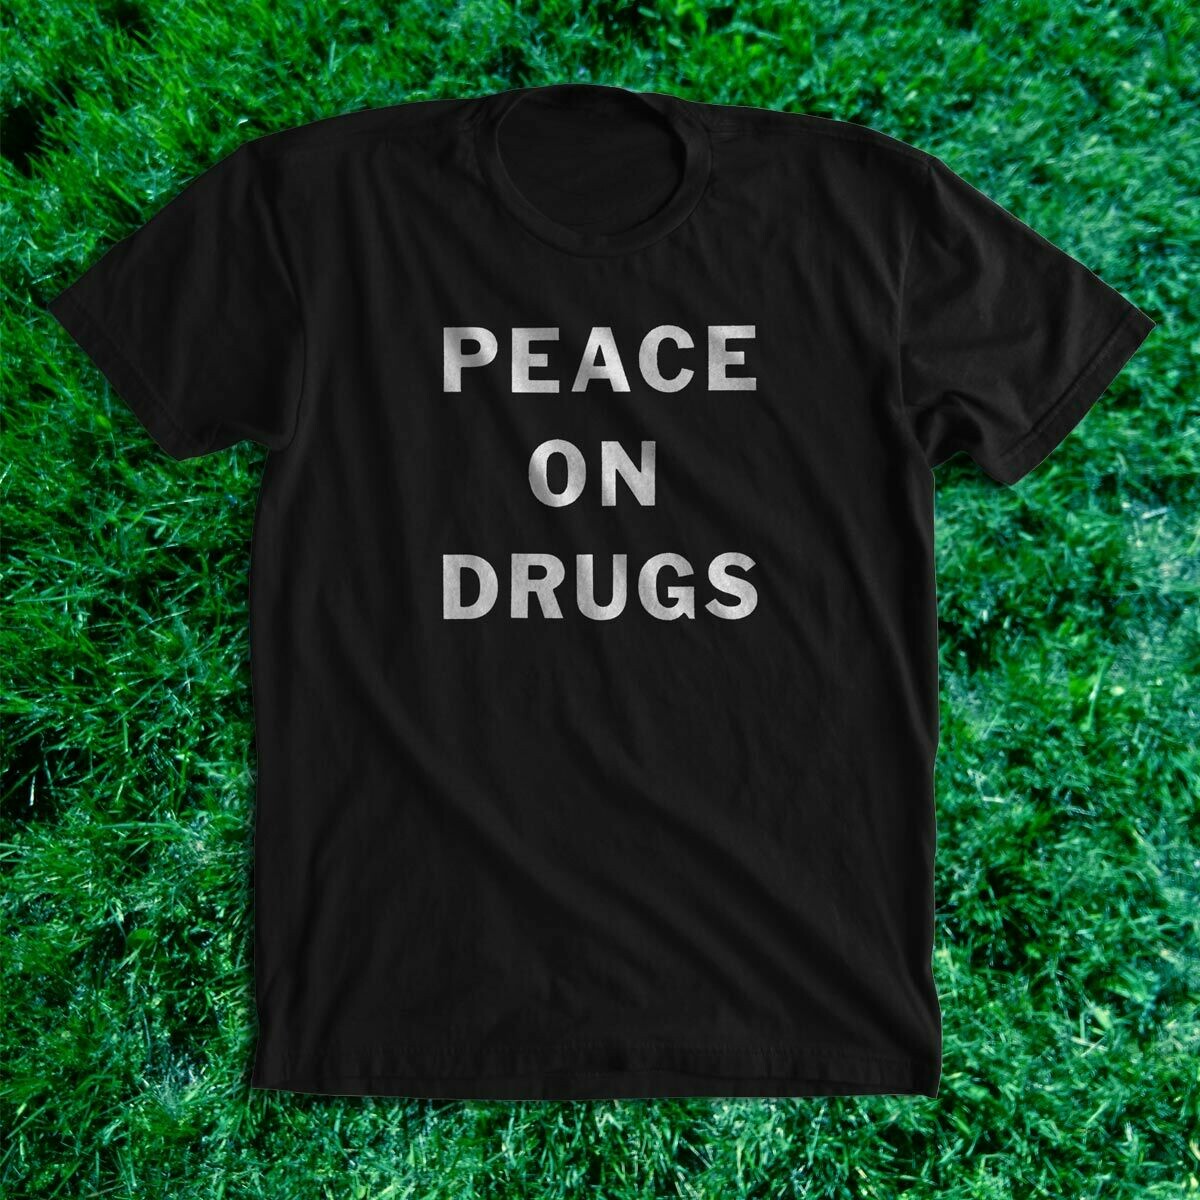 PEACE ON DRUGS t-shirt